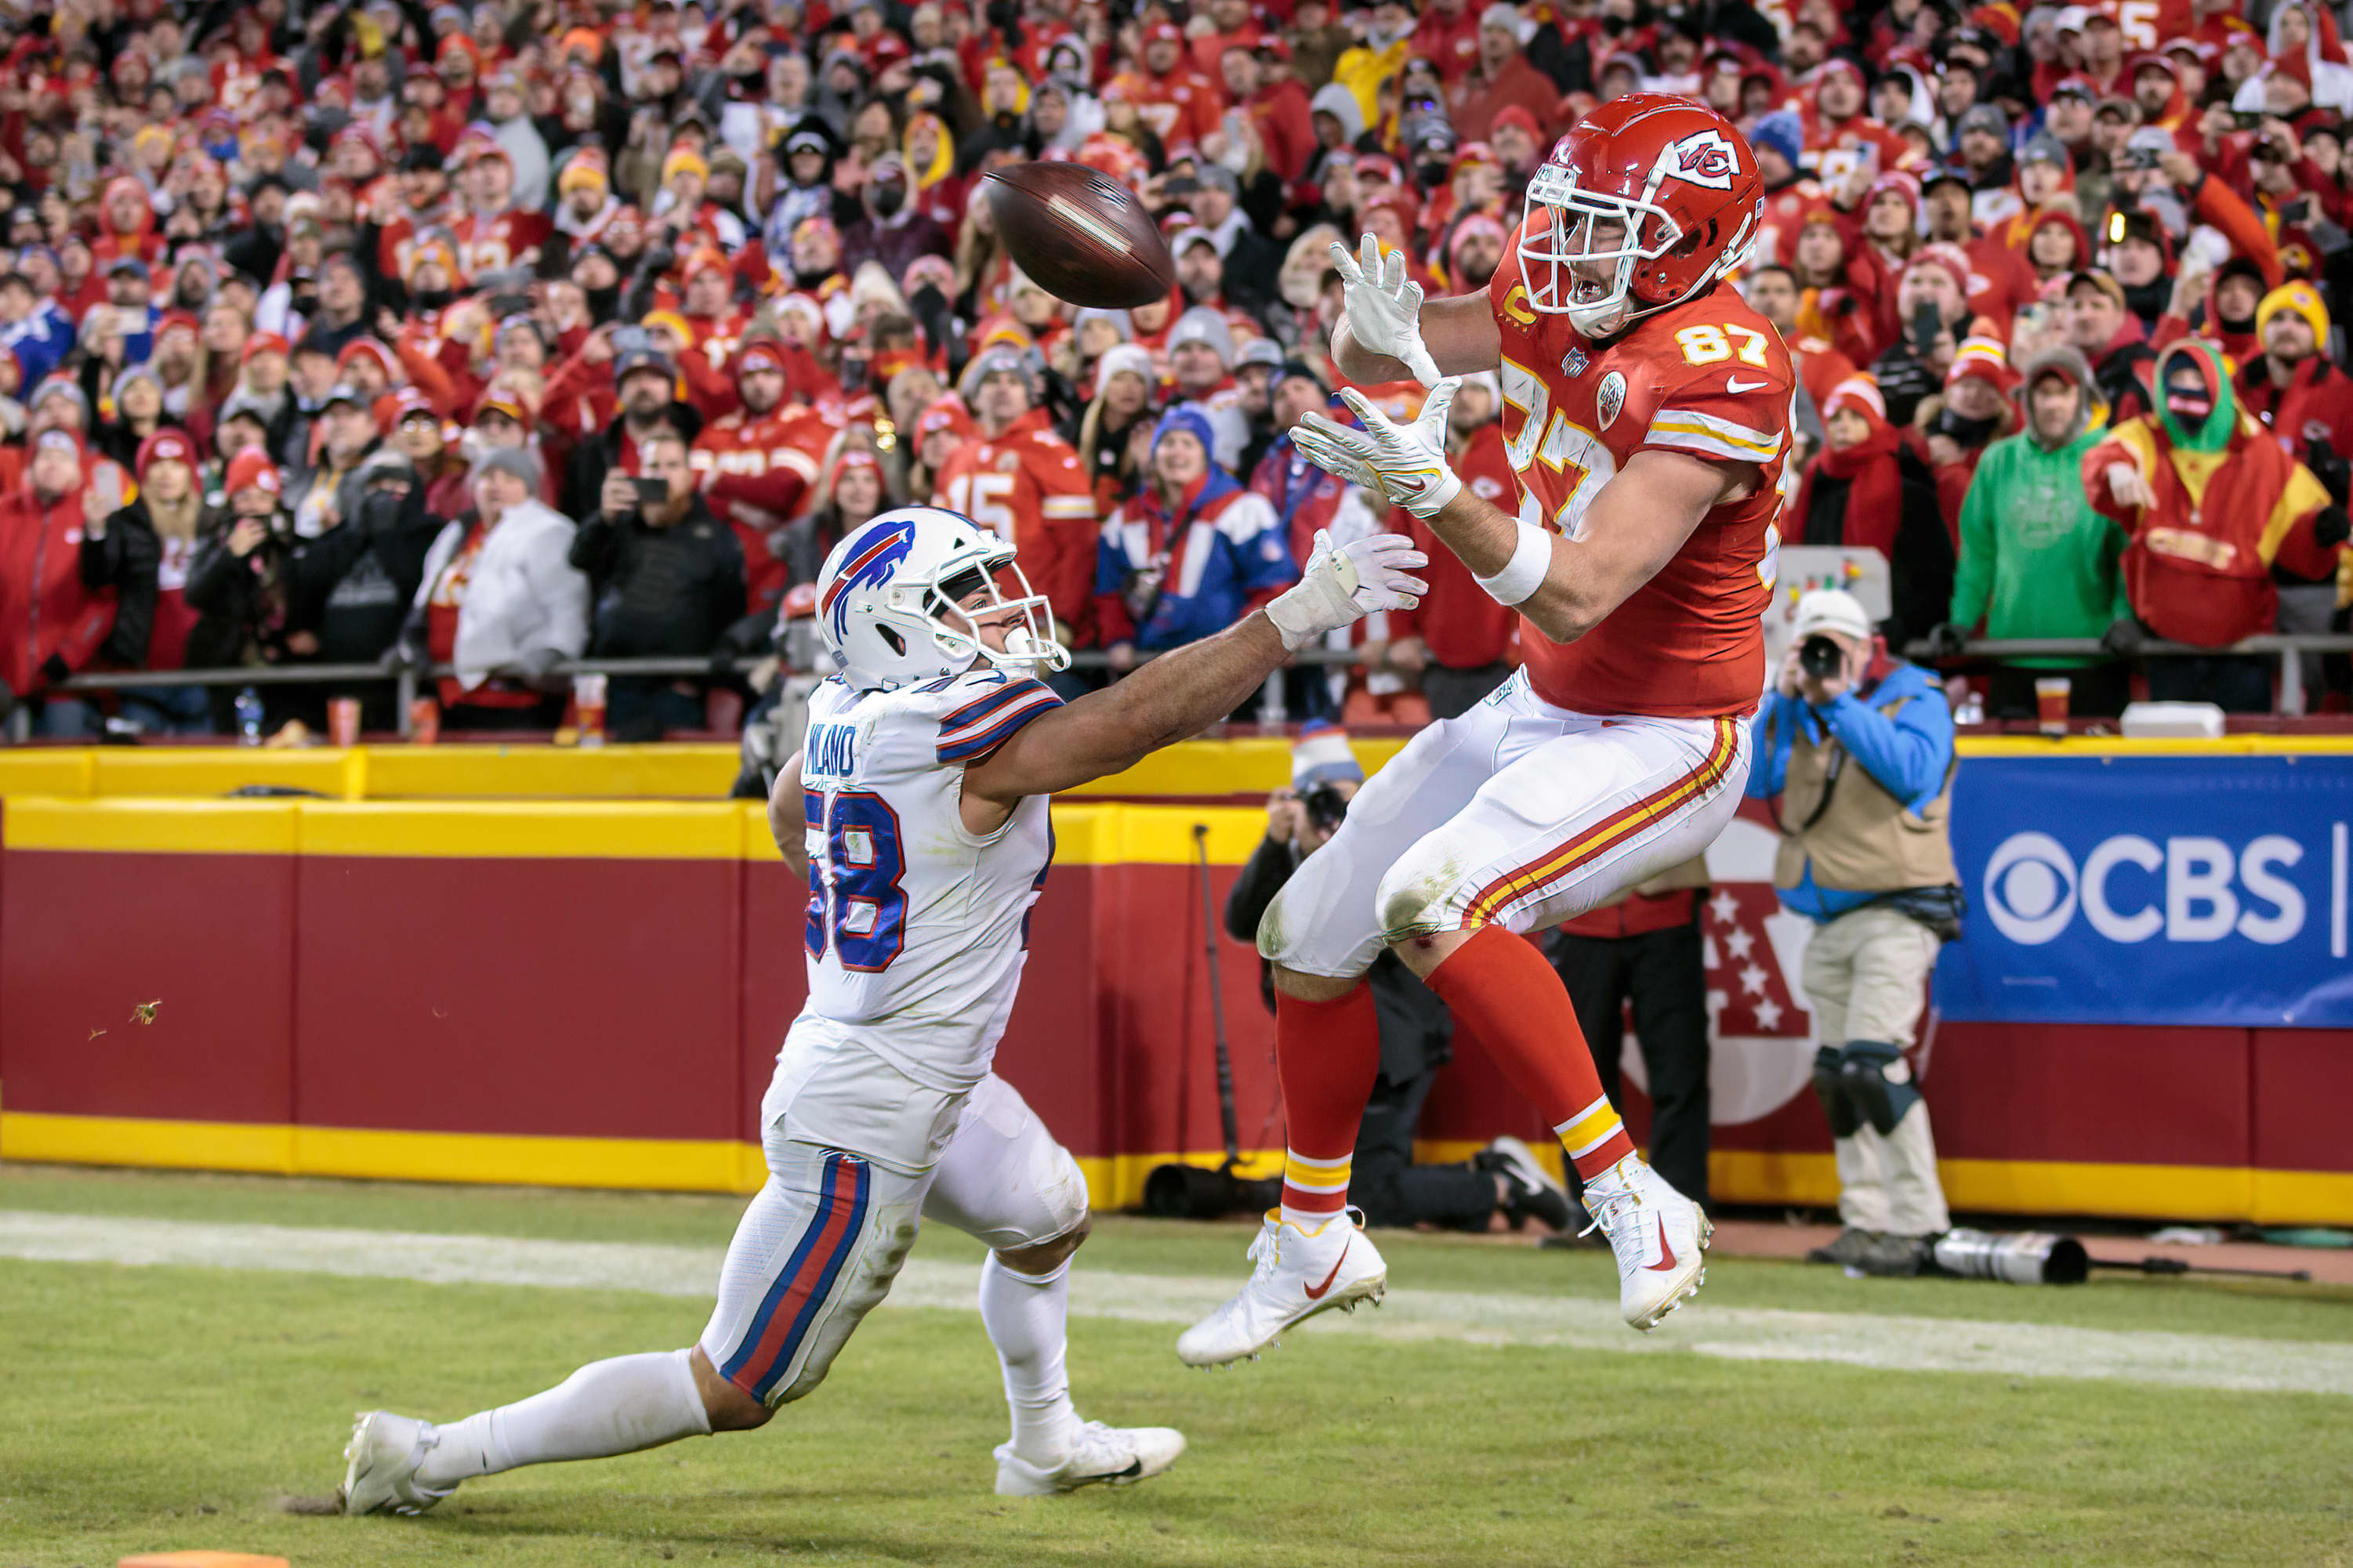 NFL playoff ratings 42.7 million people watch Chiefs win over Bills